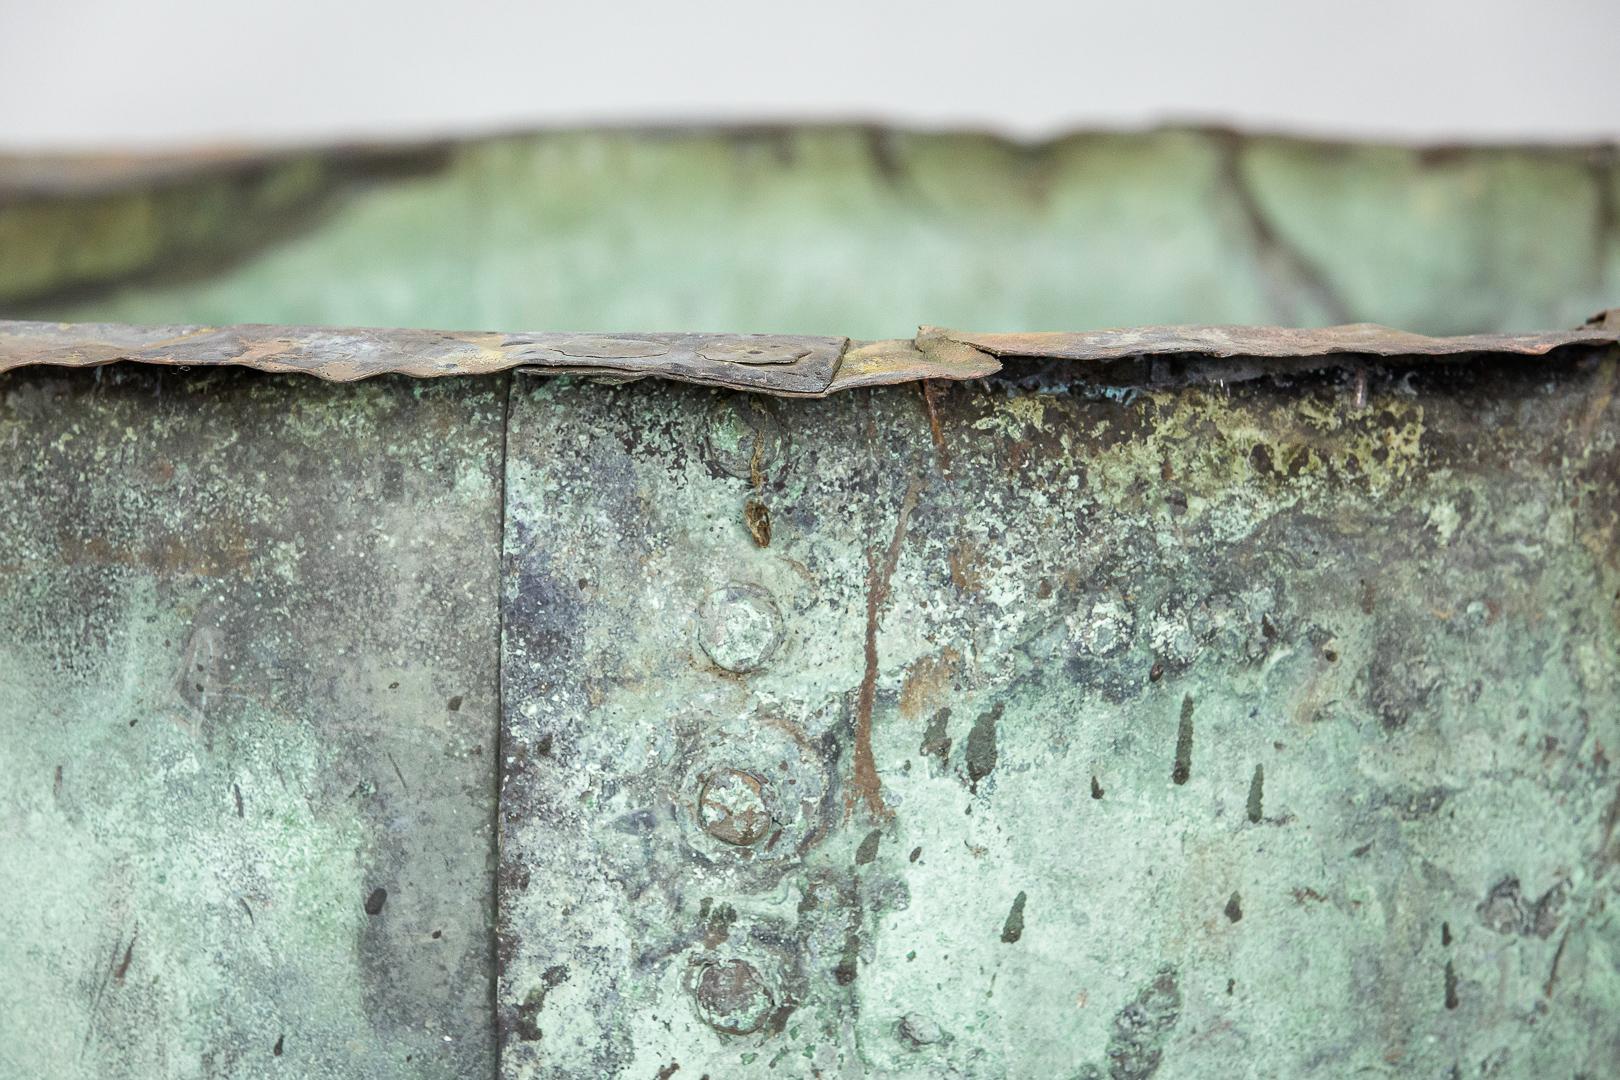 Large scale naturally verdigris English riveted copper. Wonderful colour throughout. Some minor blemishes top the rim and exterior, perfectly solid and sturdy for use as a planter or log bin. Holes drilled for drainage. England circa